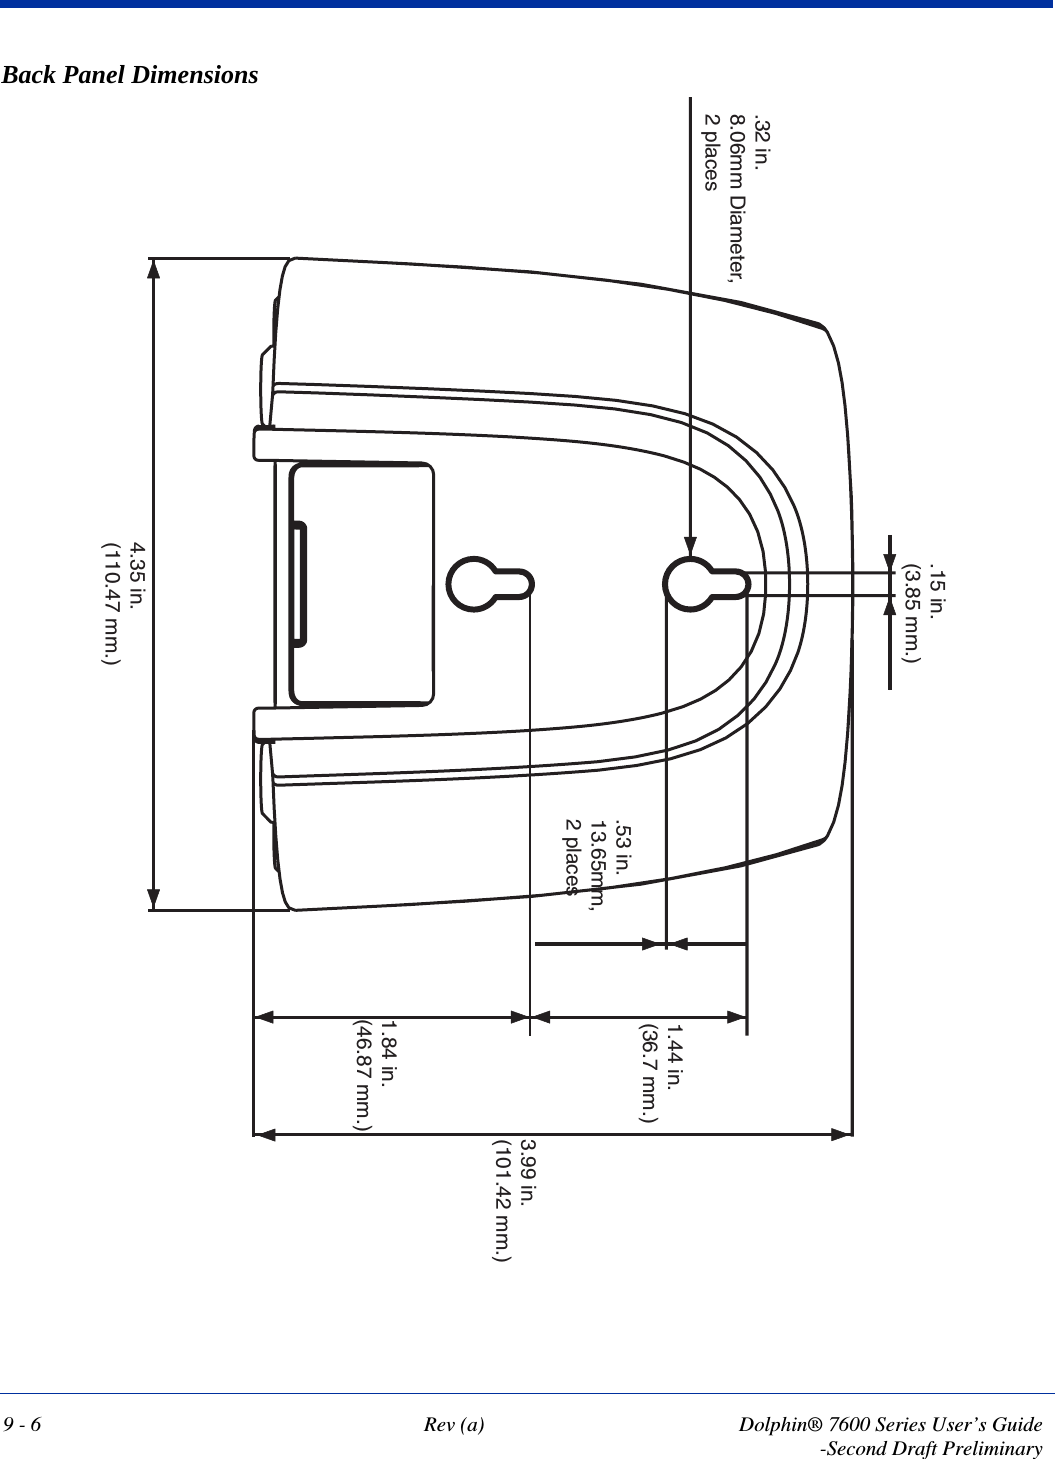 9 - 6 Rev (a) Dolphin® 7600 Series User’s Guide-Second Draft PreliminaryBack Panel Dimensions.15 in.(3.85 mm.)1.44 in.(36.7 mm.)3.99 in.(101.42 mm.)1.84 in.(46.87 mm.)4.35 in.(110.47 mm.).32 in.8.06mm Diameter, 2 places.53 in.13.65mm,2 places